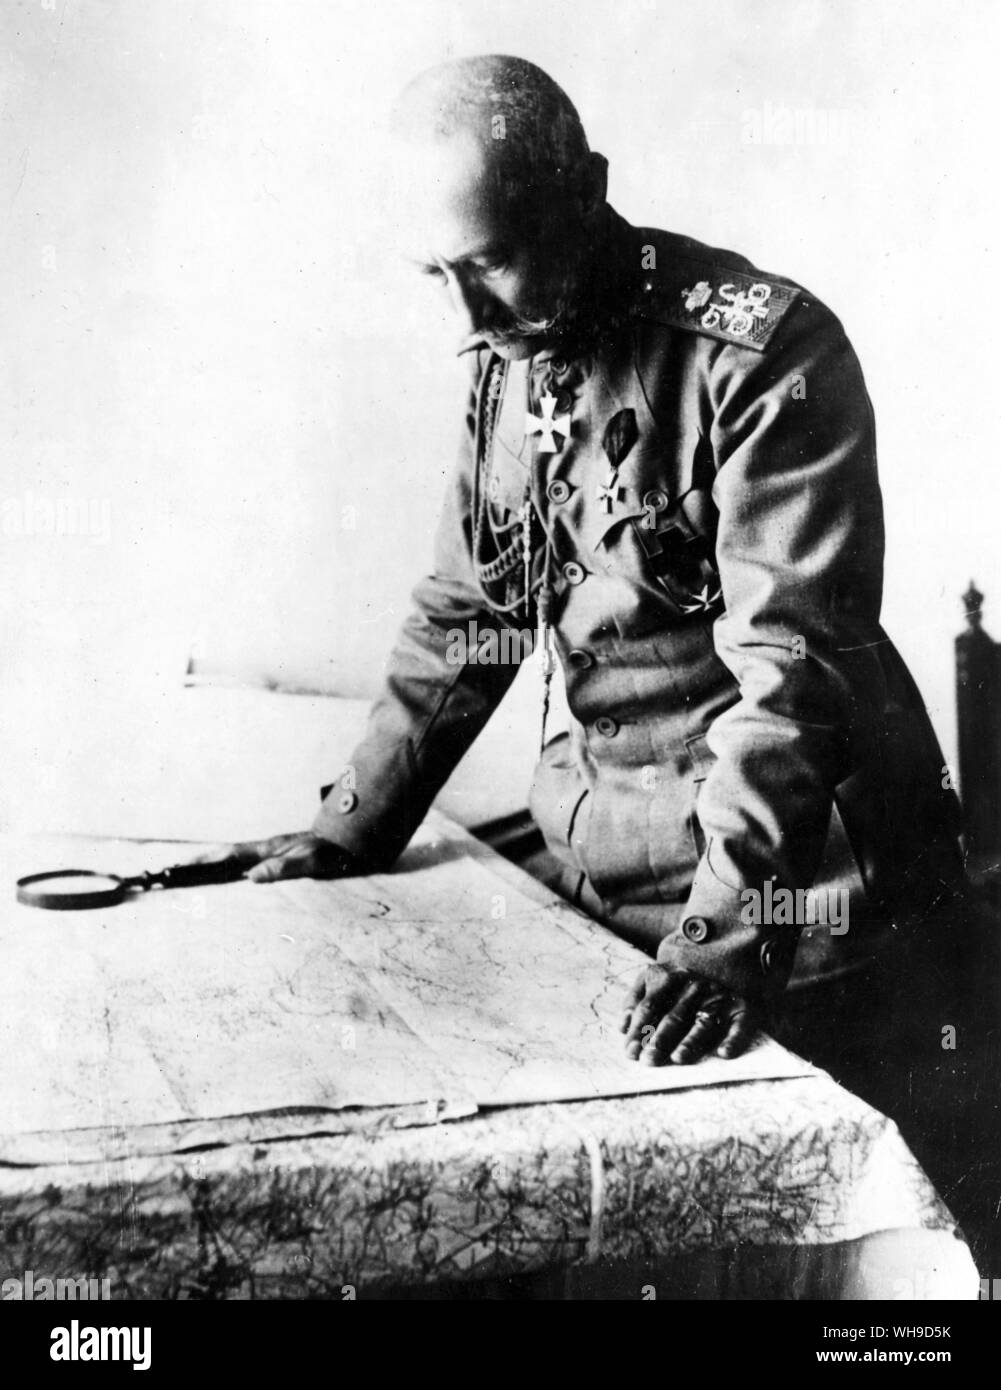 Russian General, Aleksei Alekseevich Brusilov (1853-1926). Military leader in World War I, who achieved major success against the Austro-Hungarian forces in 1916. Here, he studies the situation on a map, November 1917. Stock Photo